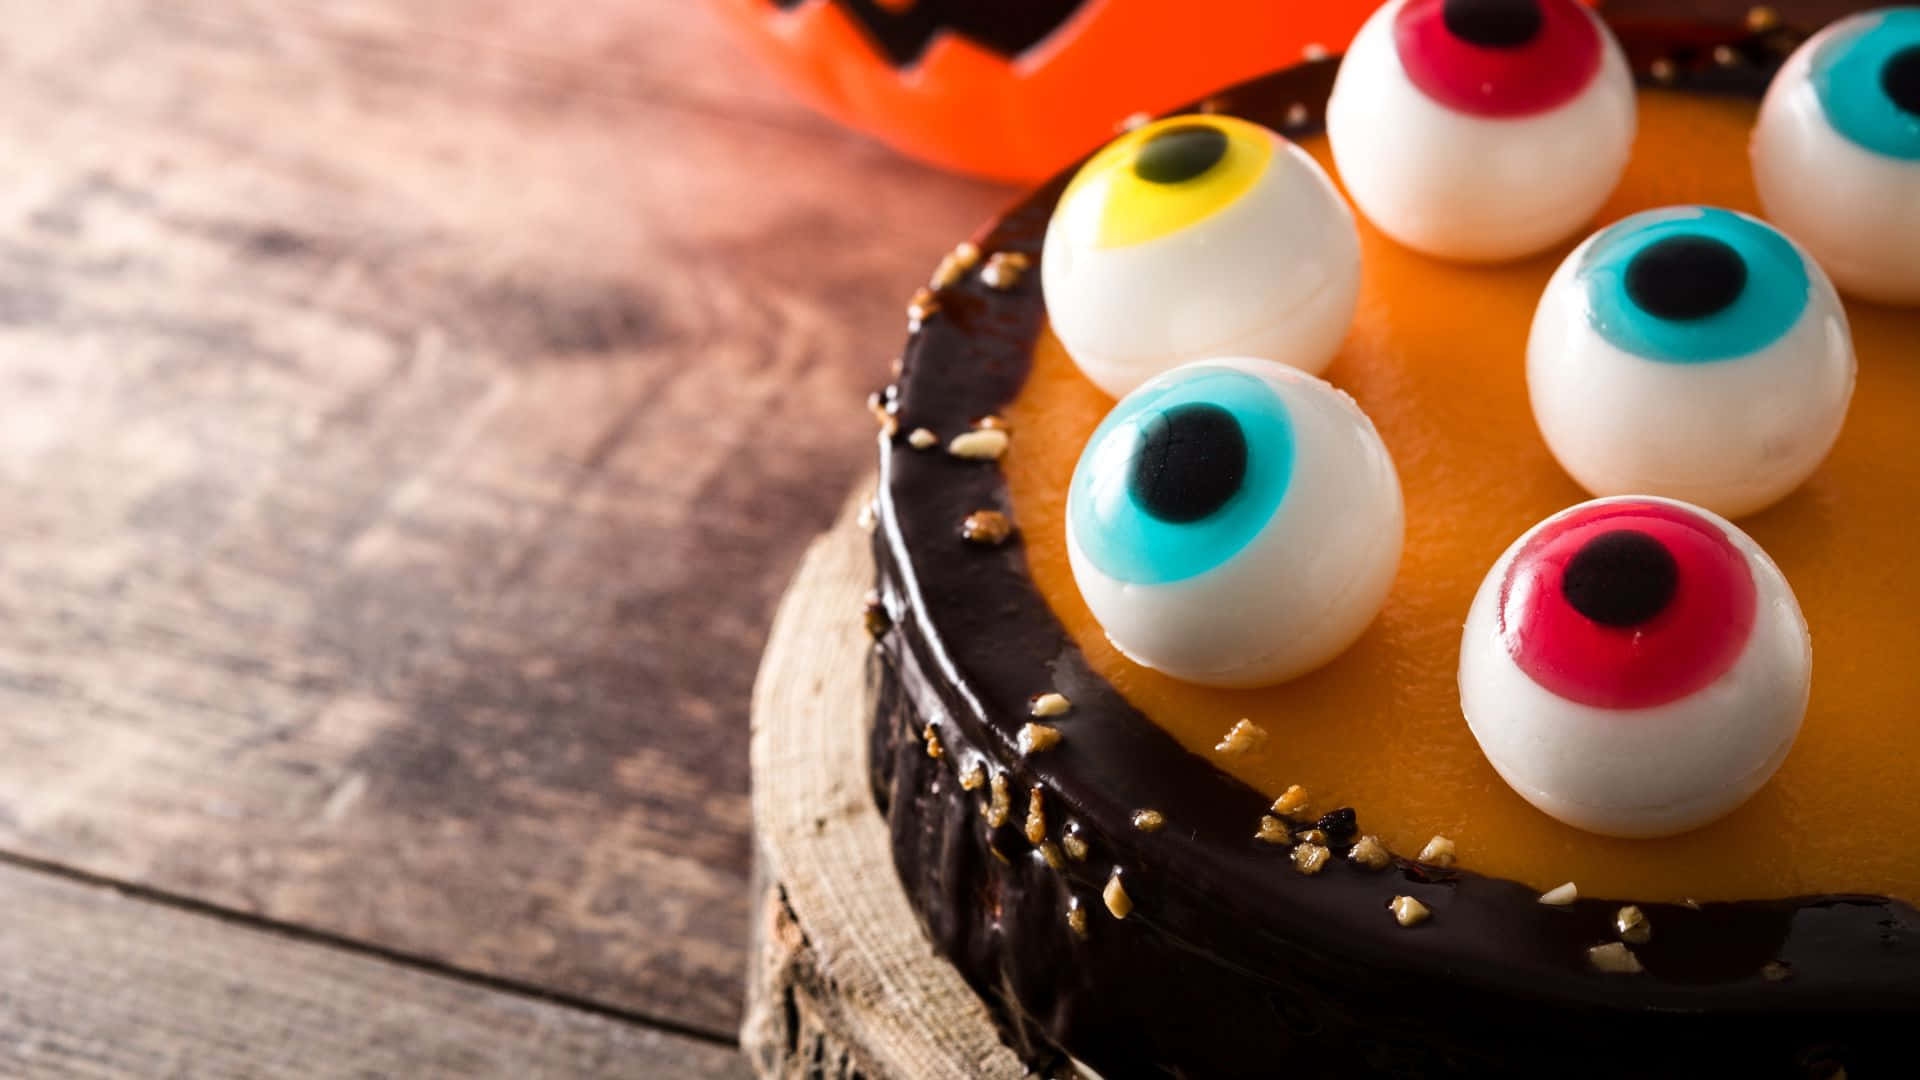 Trick or Treat with this Spooky Halloween Cake! Wallpaper